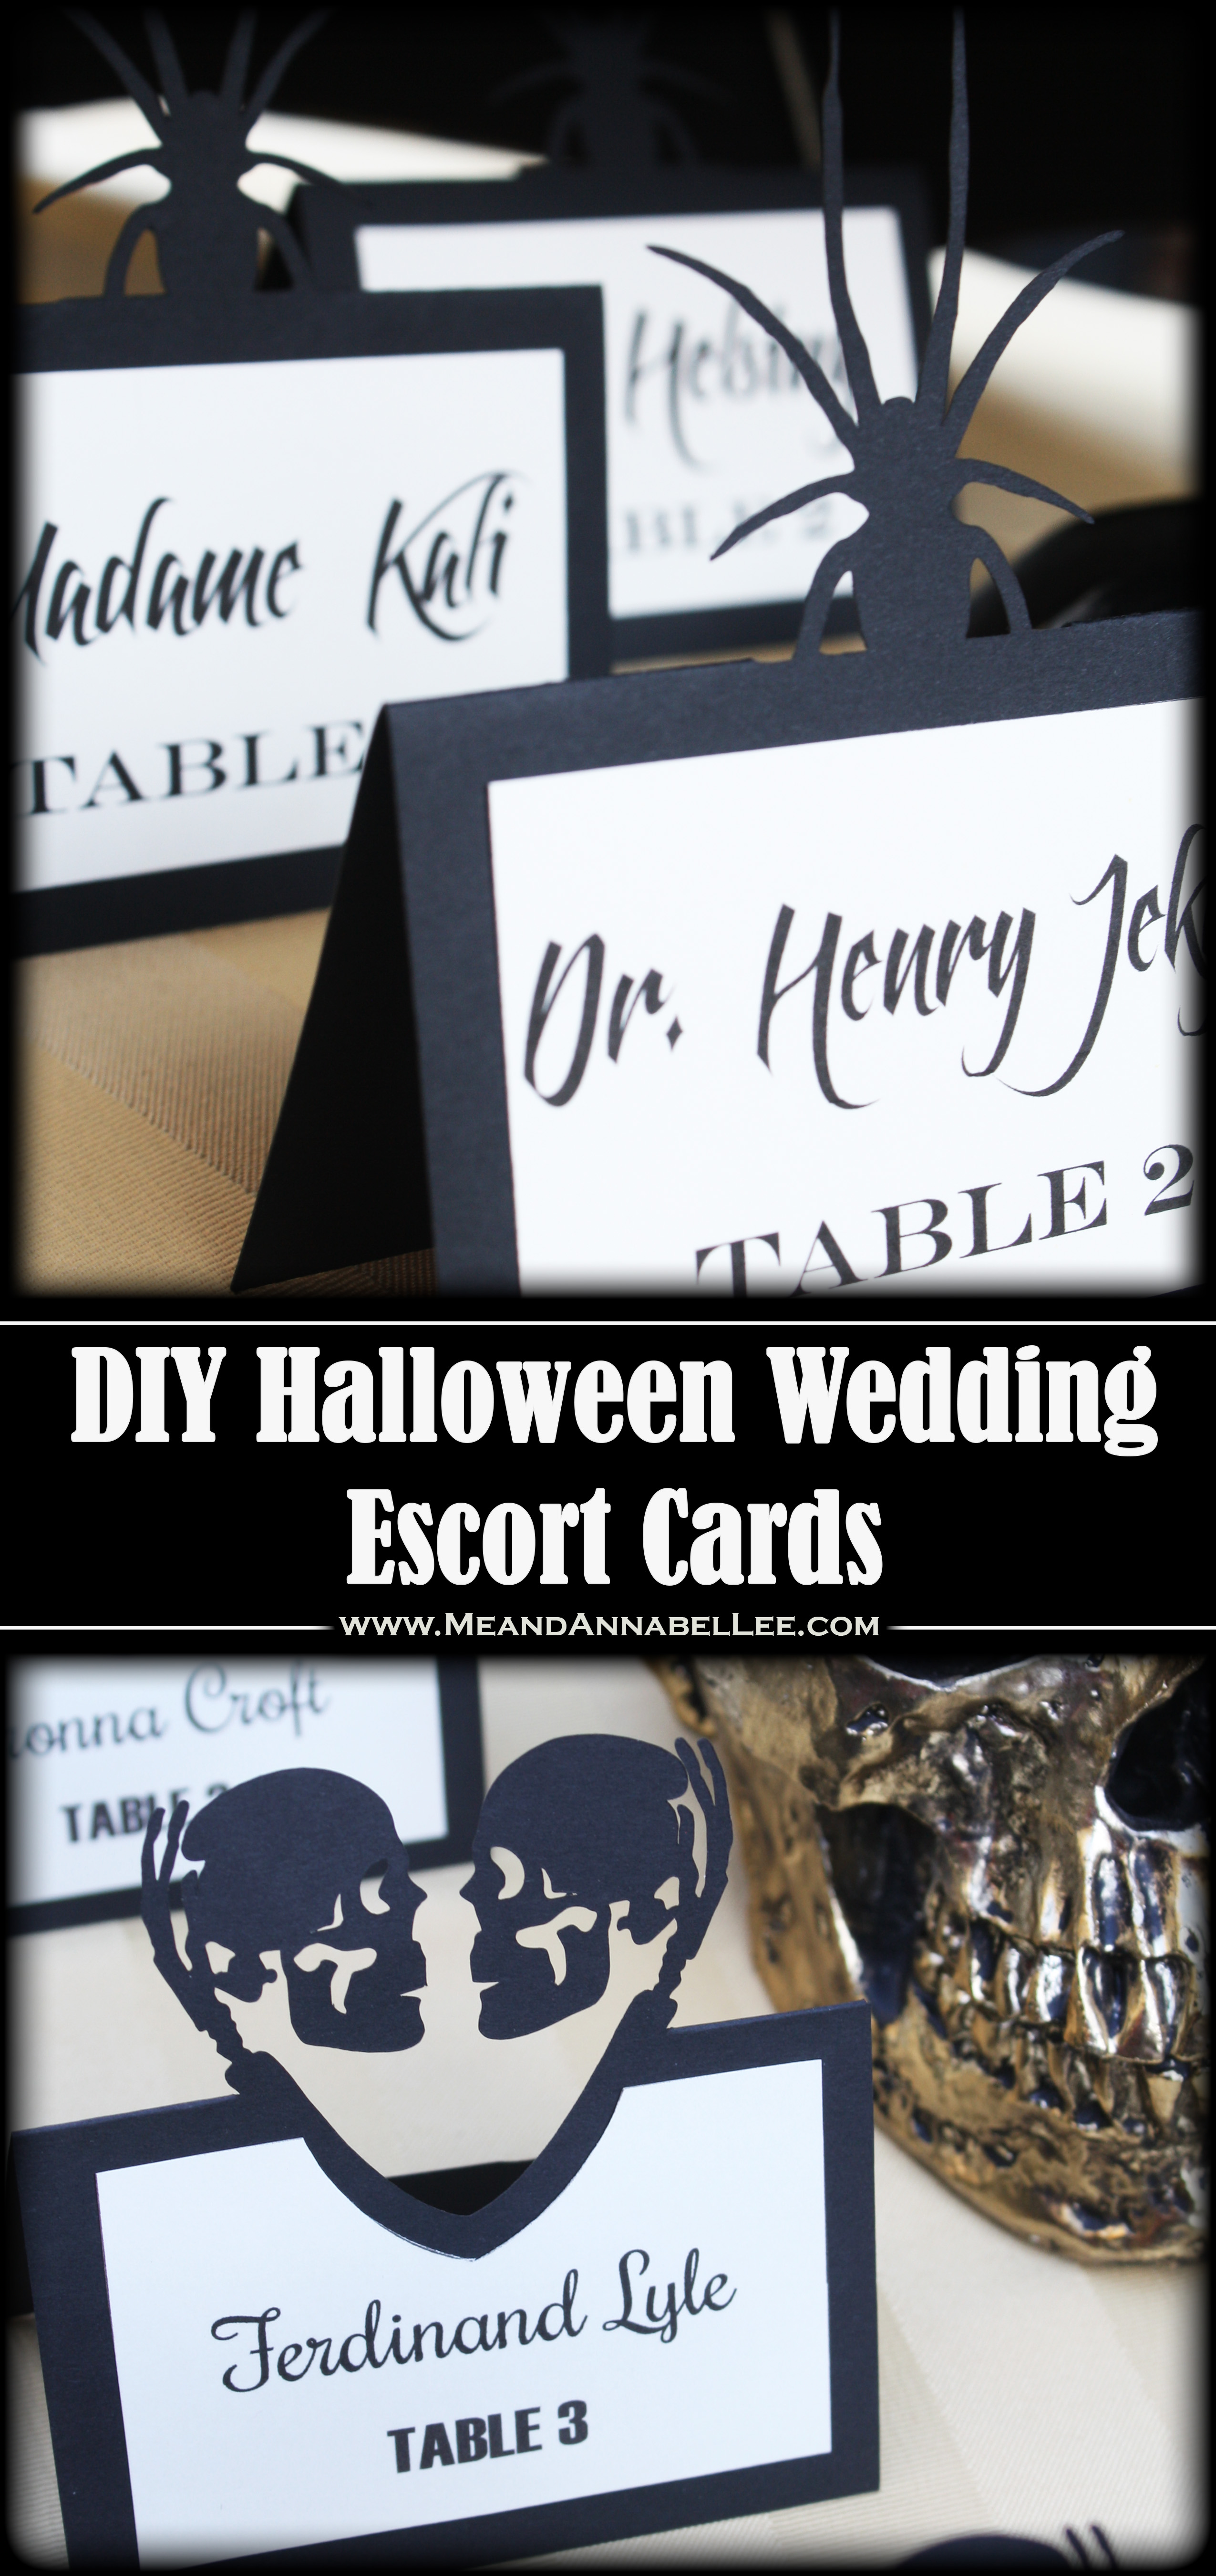 How to Make Laser Cut Halloween Wedding Escort Cards with Your Cricut | Skeleton Couple | Spiders | Gothic Entertaining | Seating Cards | www.MeandAnnabelLee.com